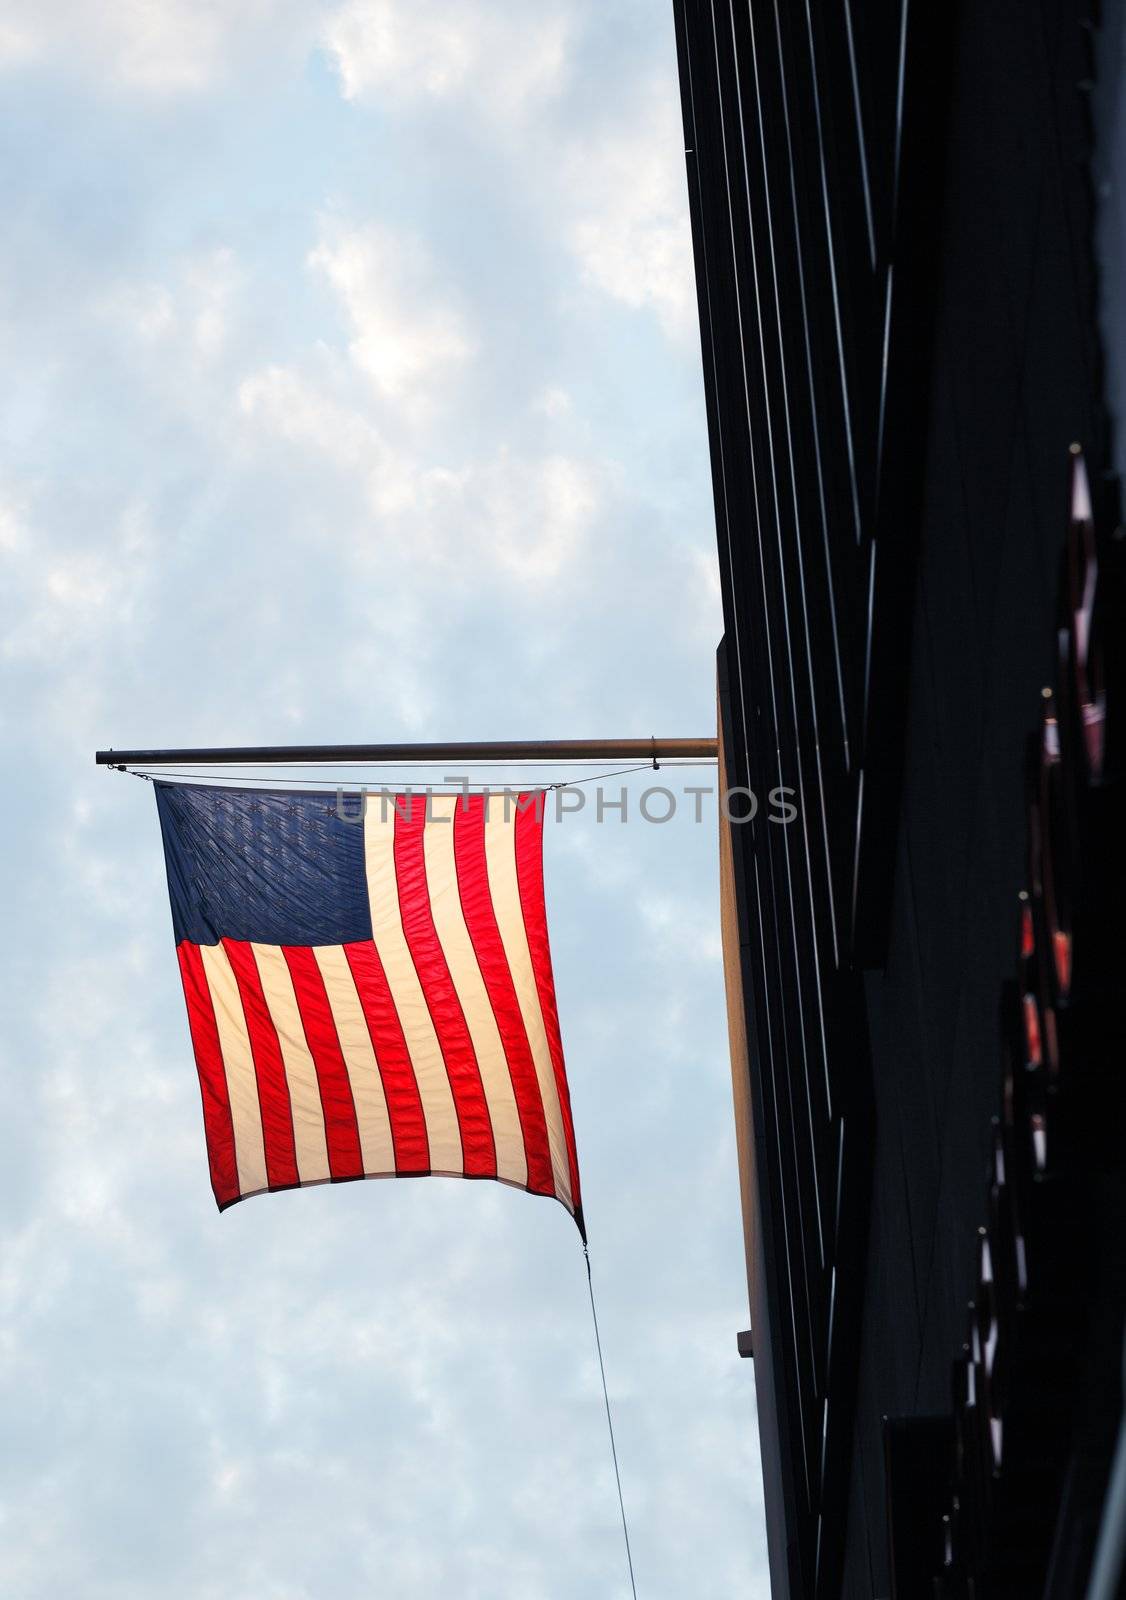 The Flag of United States in evening light, hanging from a building wall.